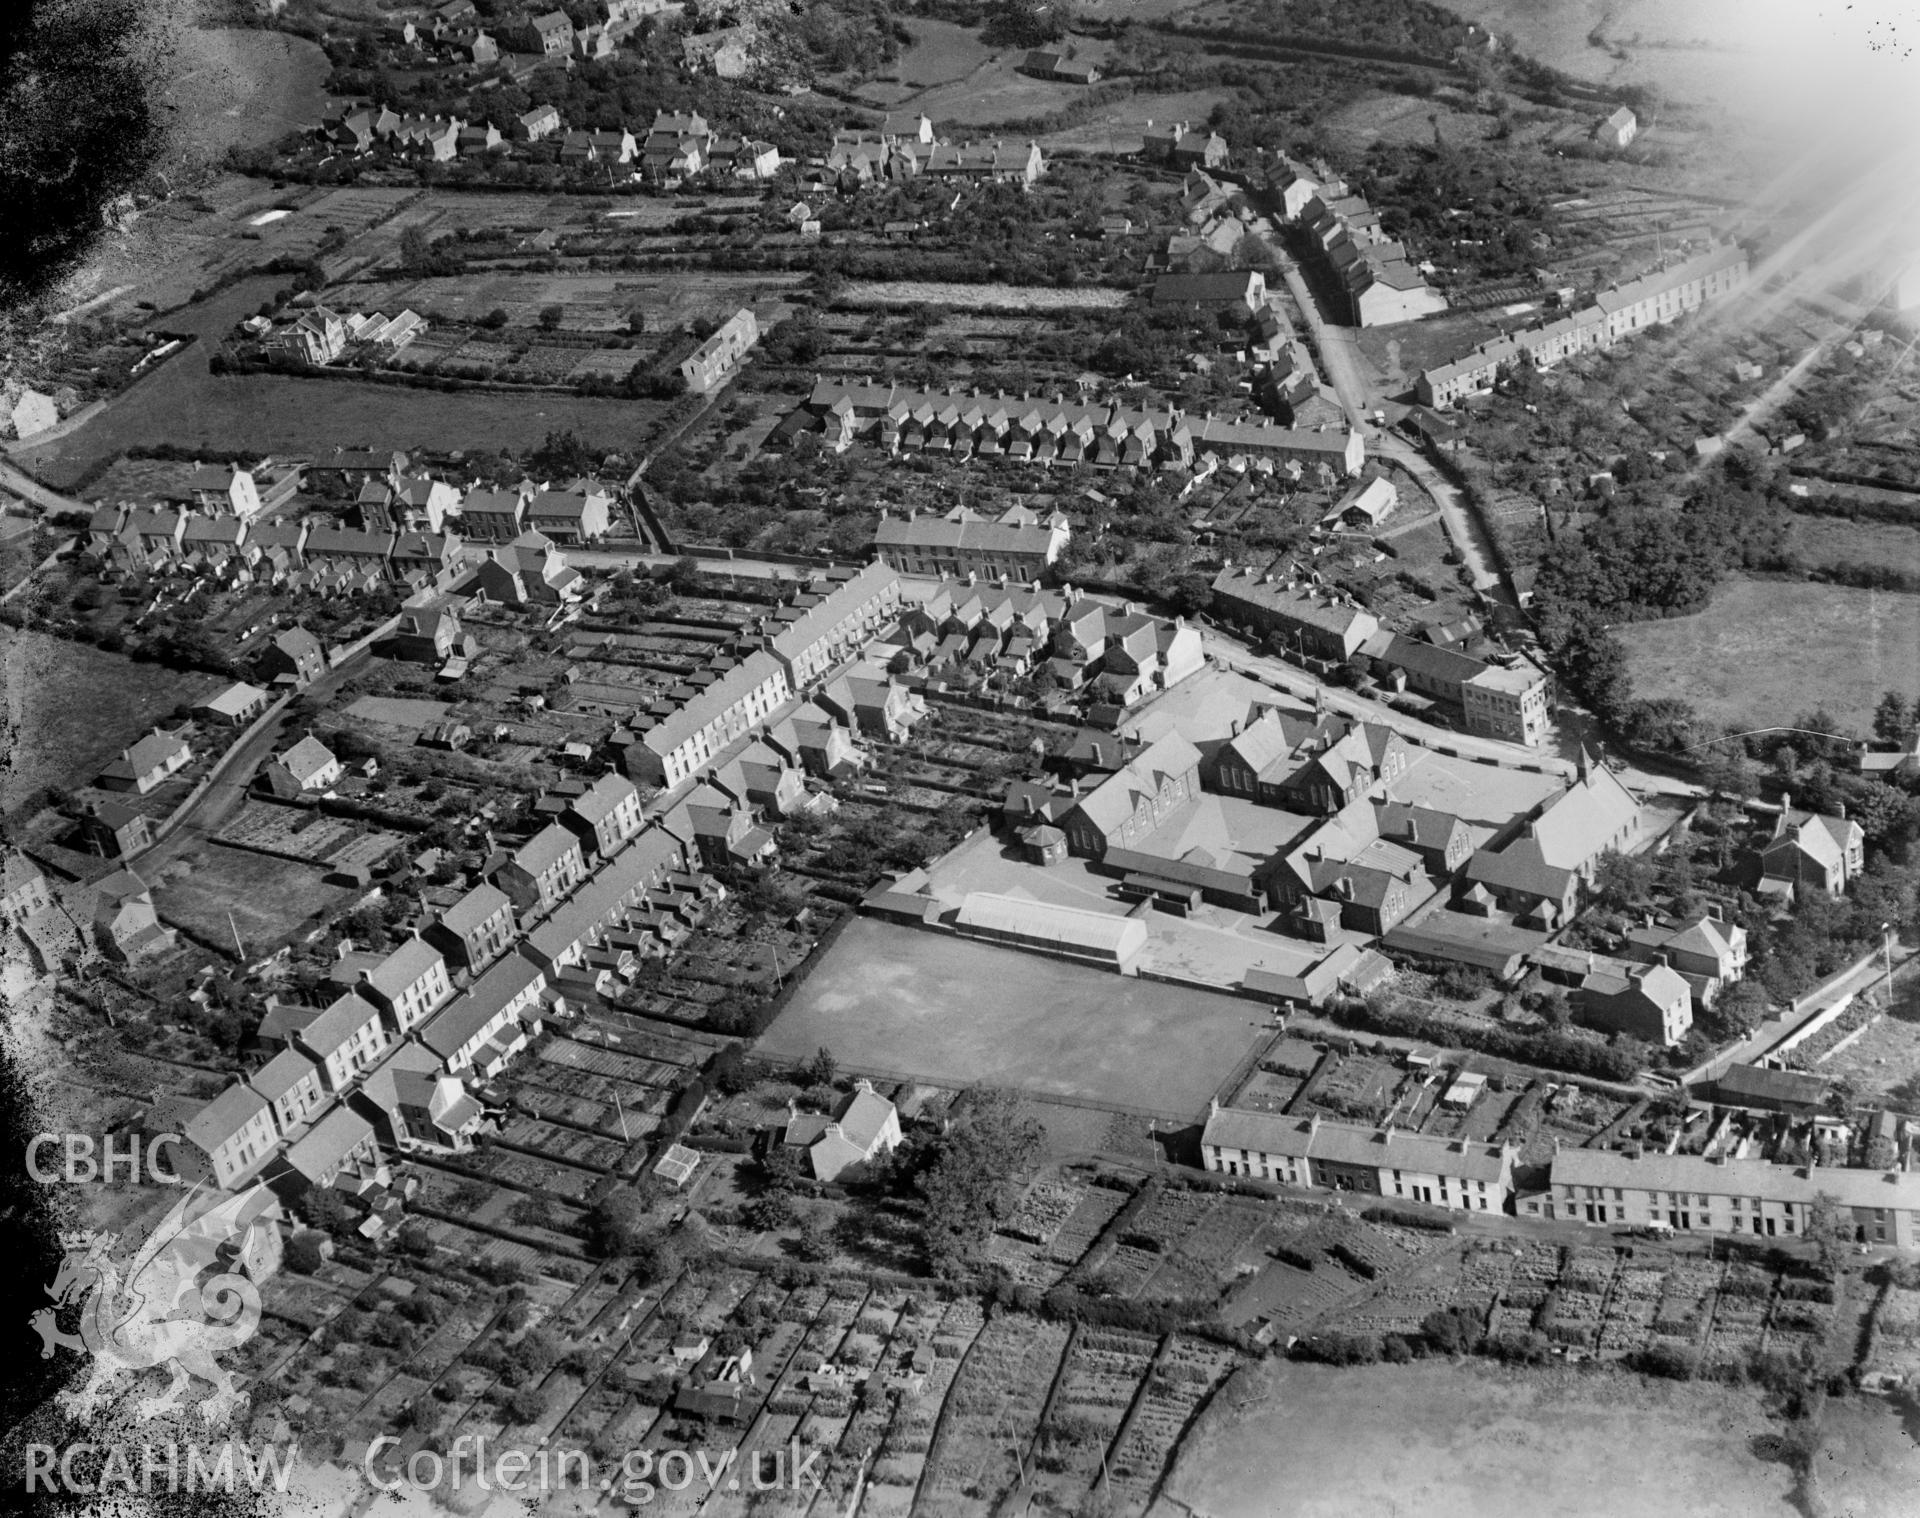 View of Pembrey showing school, oblique aerial view. 5?x4? black and white glass plate negative.